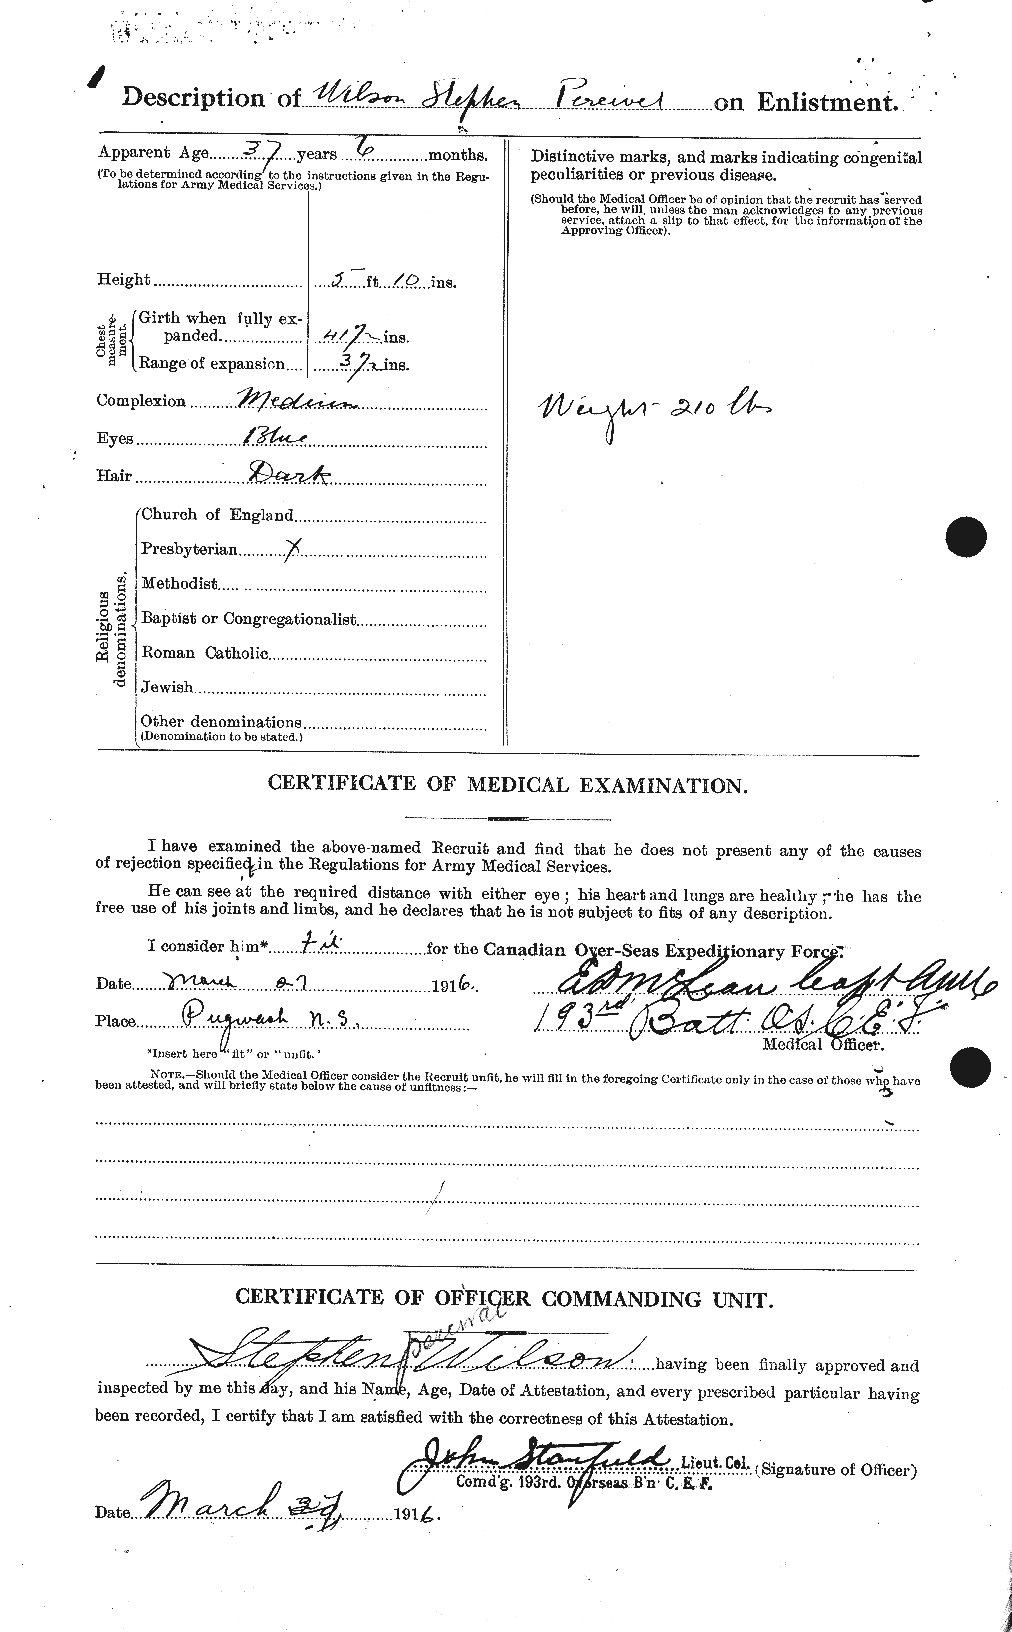 Personnel Records of the First World War - CEF 681150b